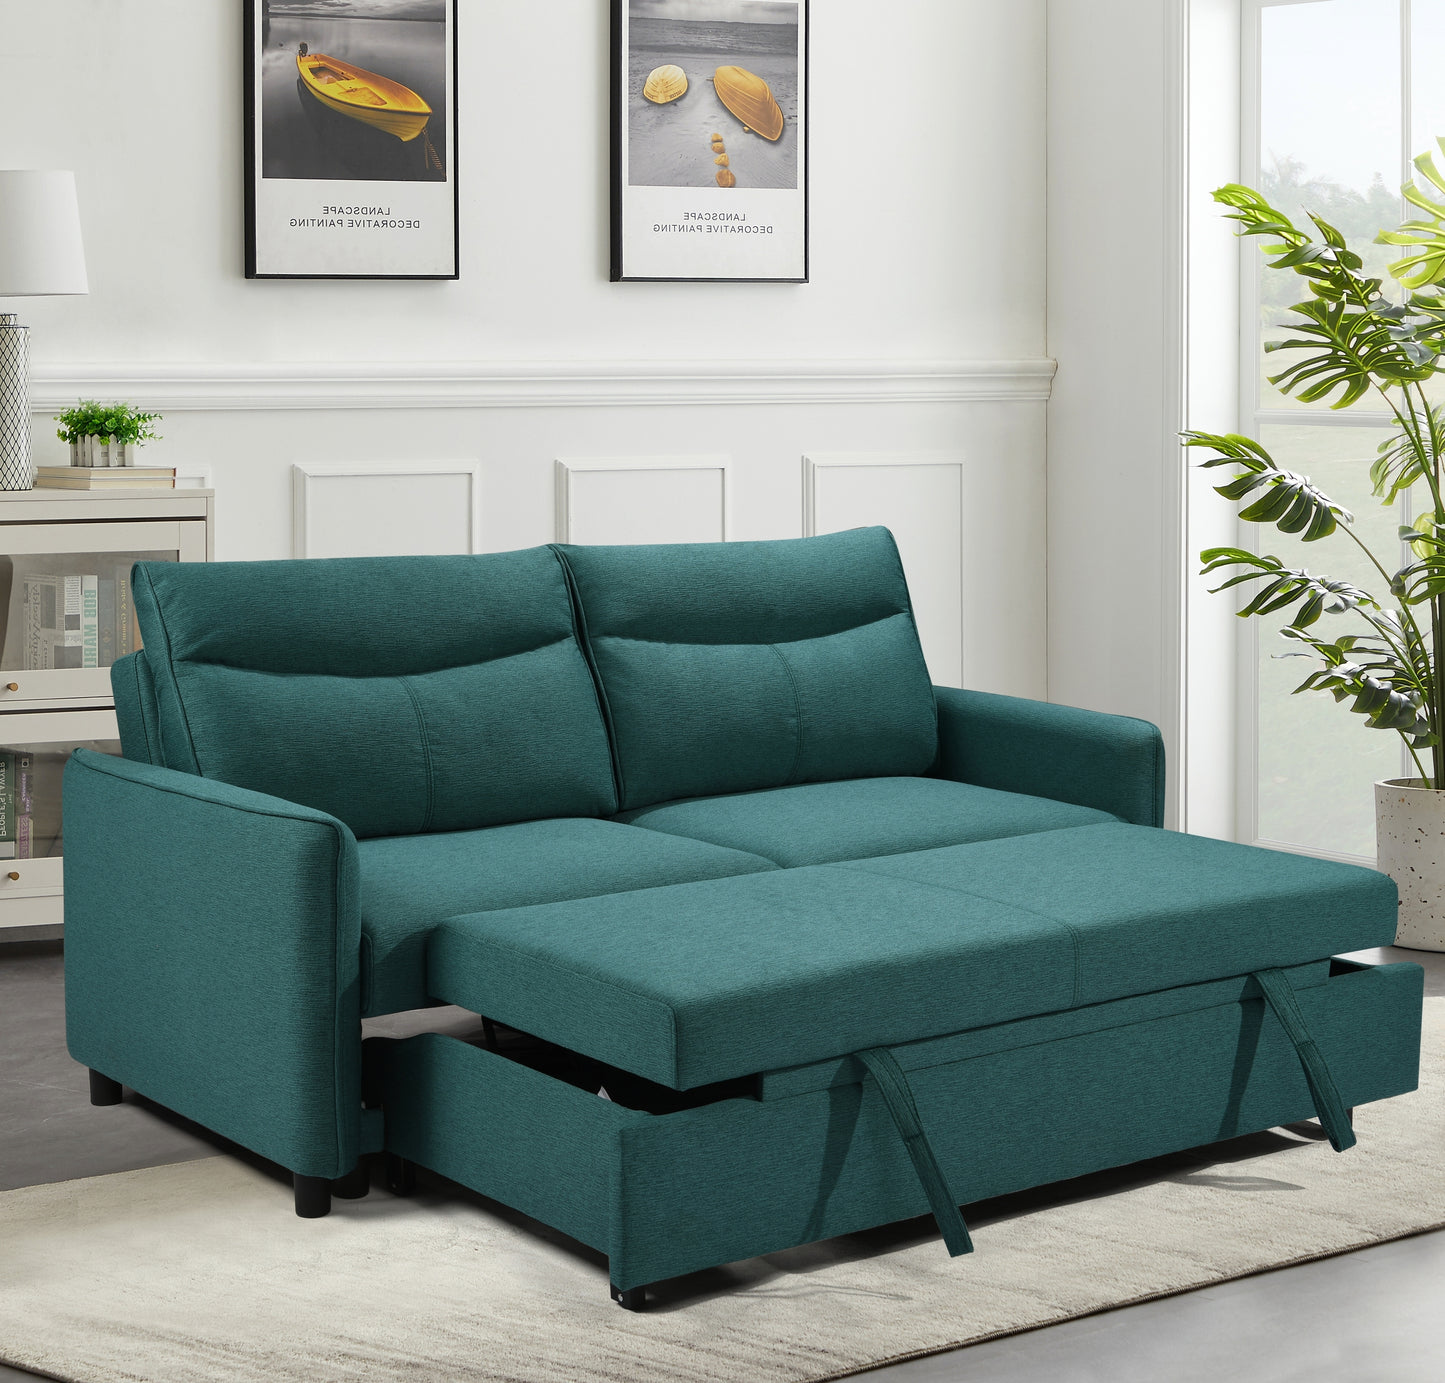 1st Choice 3 in 1 Convertible Sleeper Sofa Bed Loveseat Futon Couch